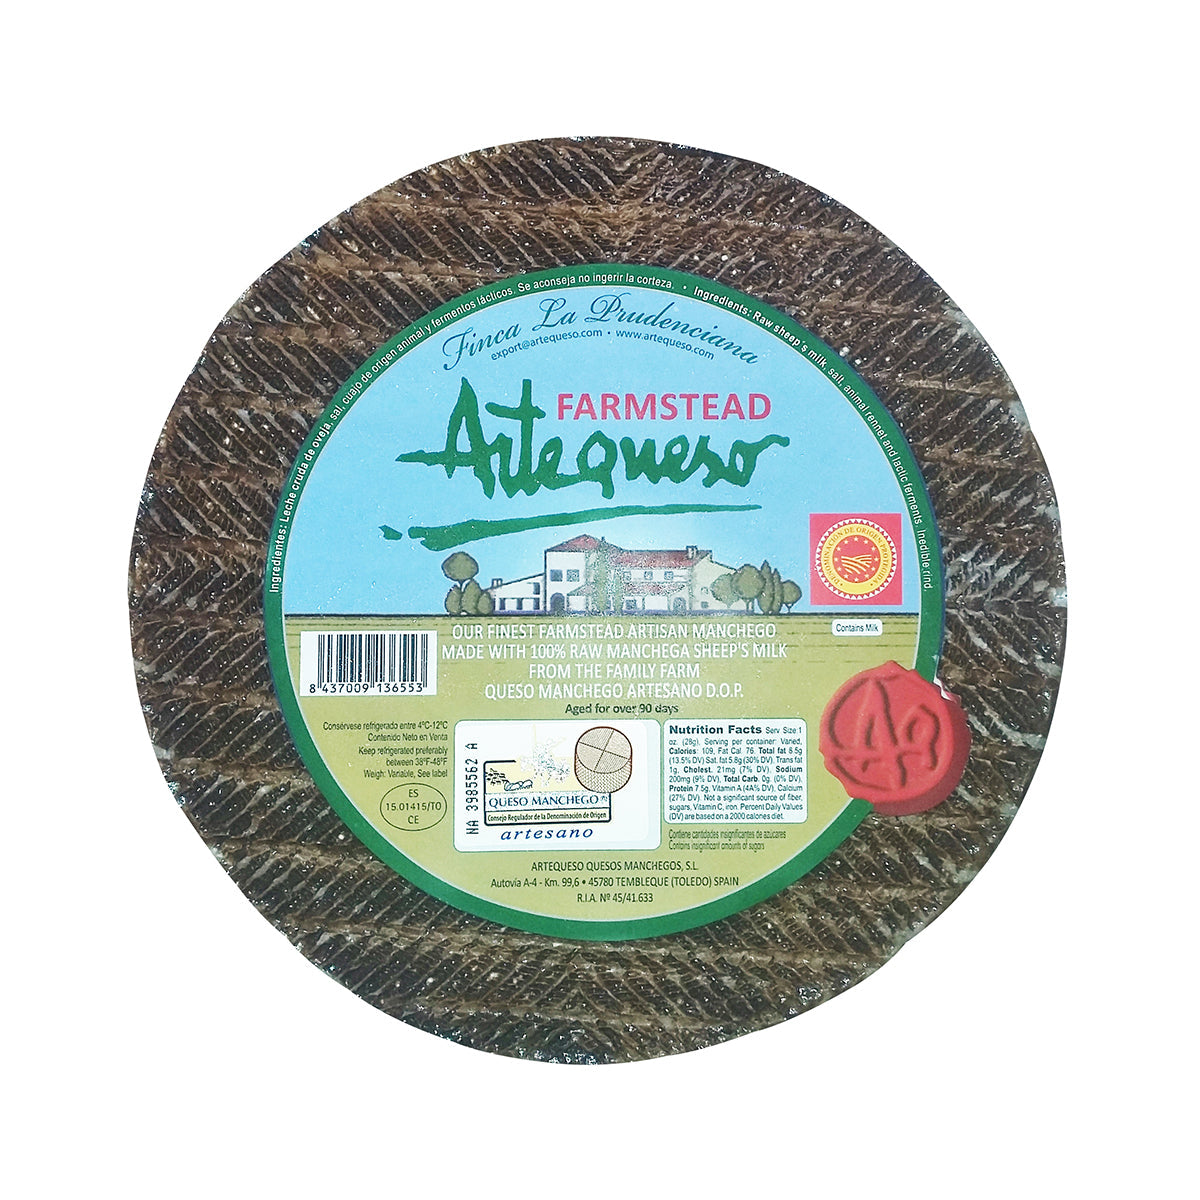 Artequeso Farmstead Manchego 6 Month Aged Cheese Wheel